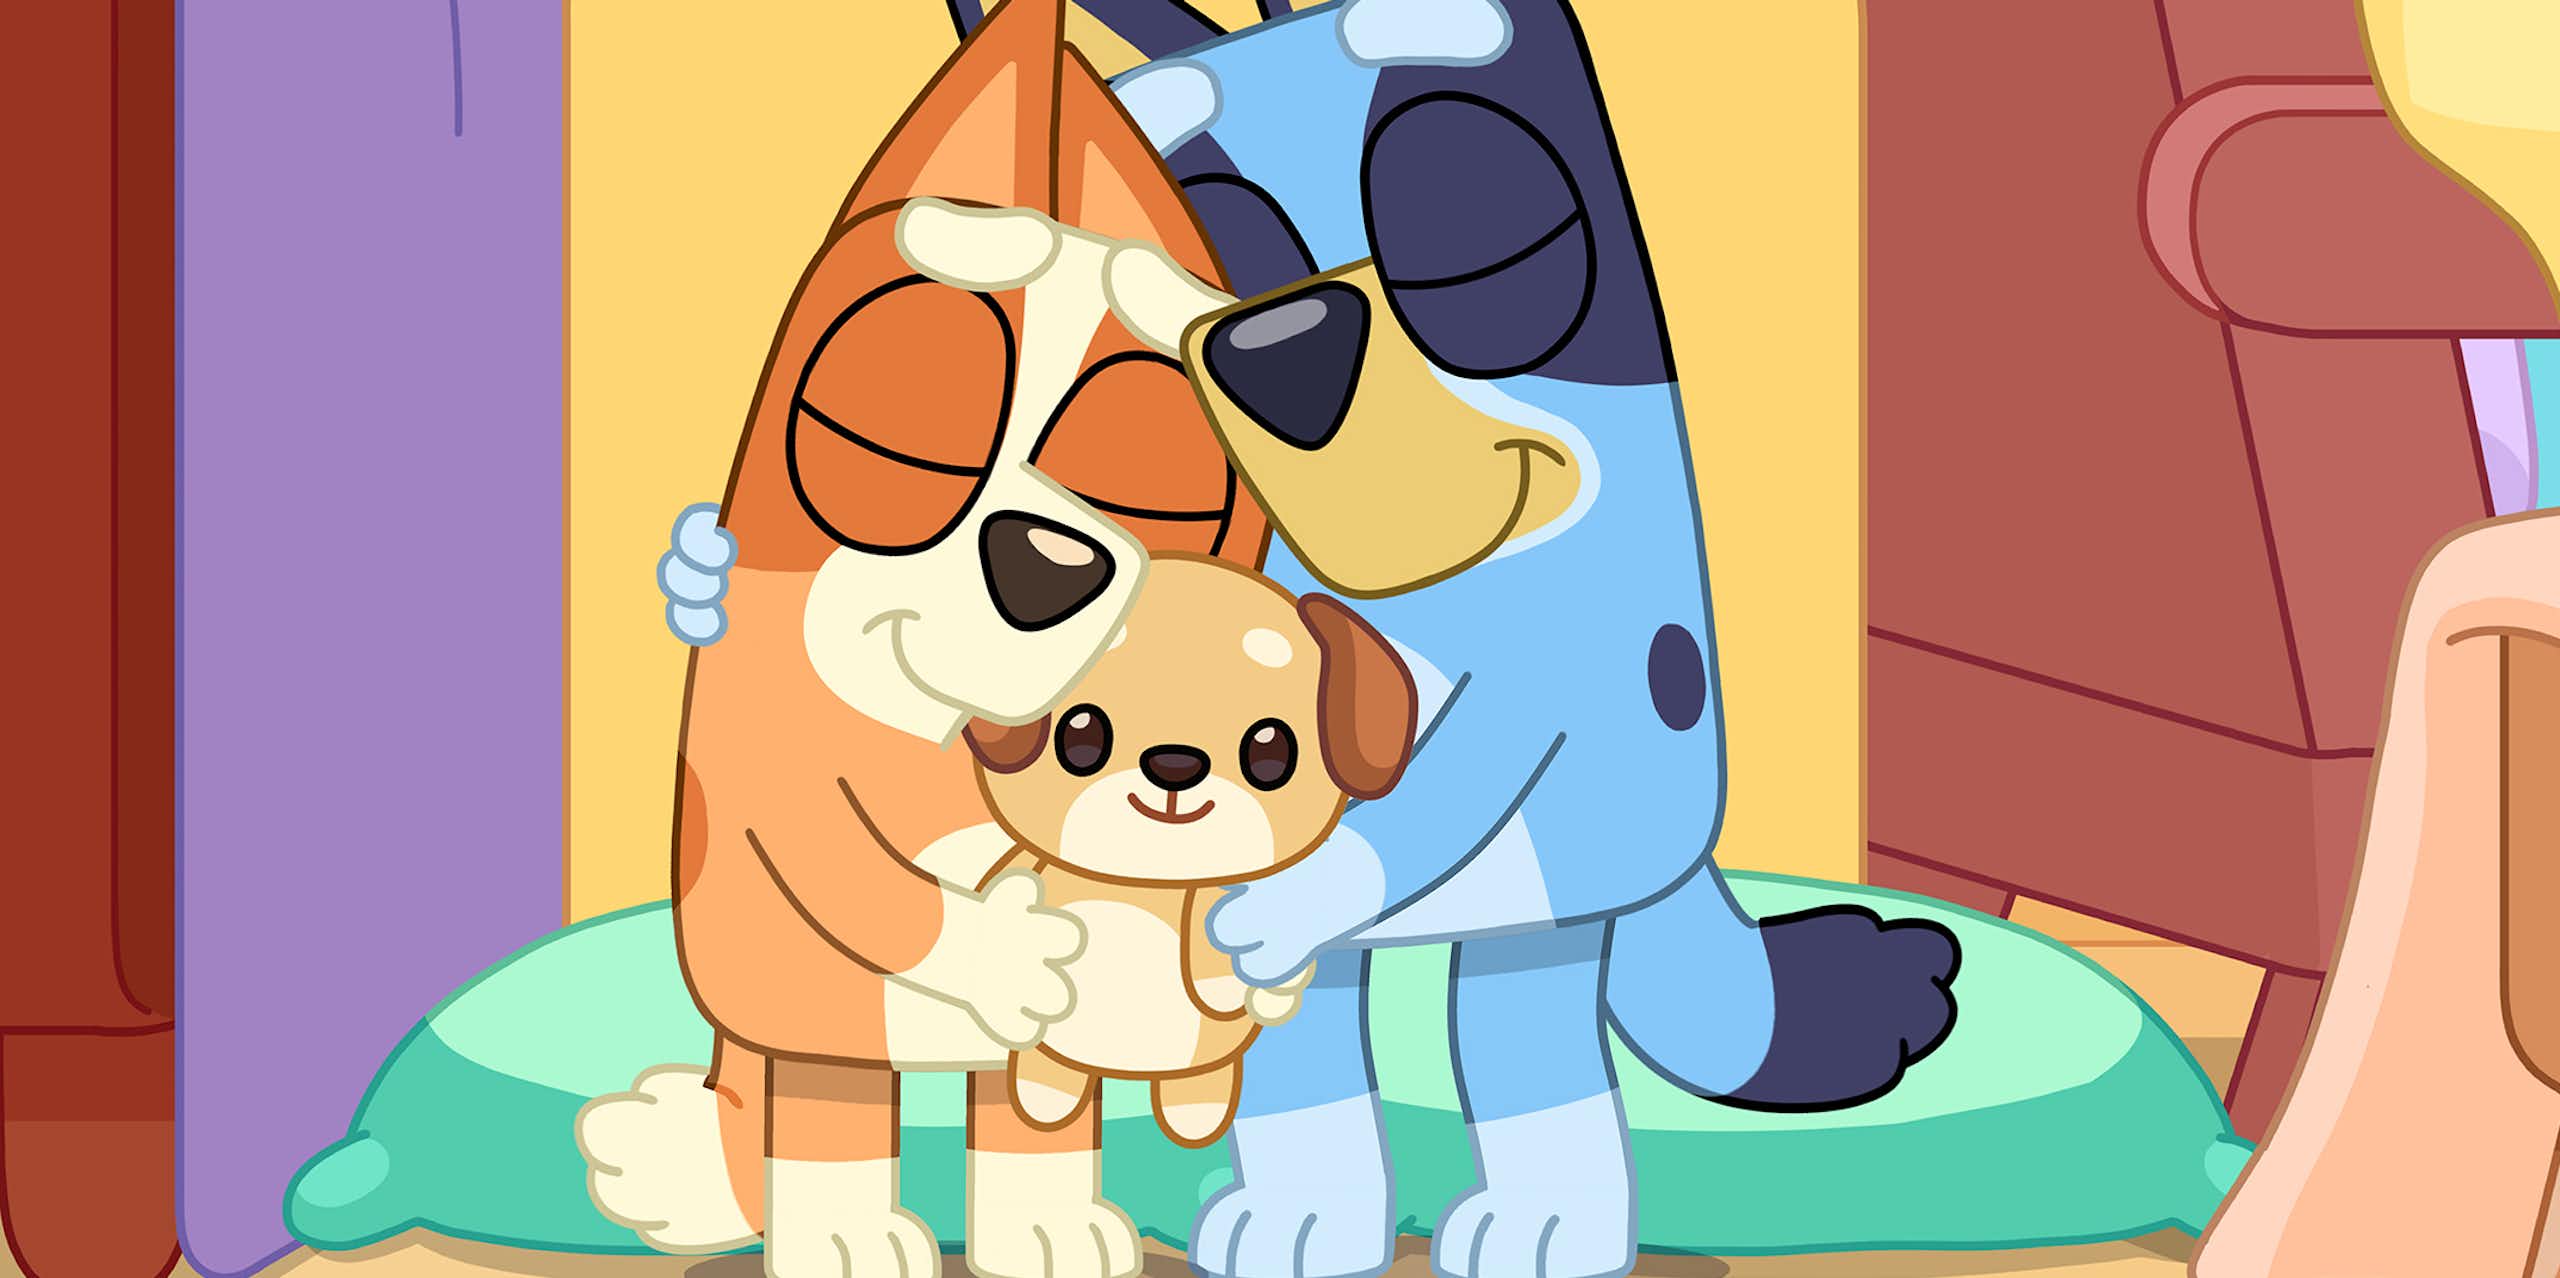 A still from the animated ABC show Bluey.